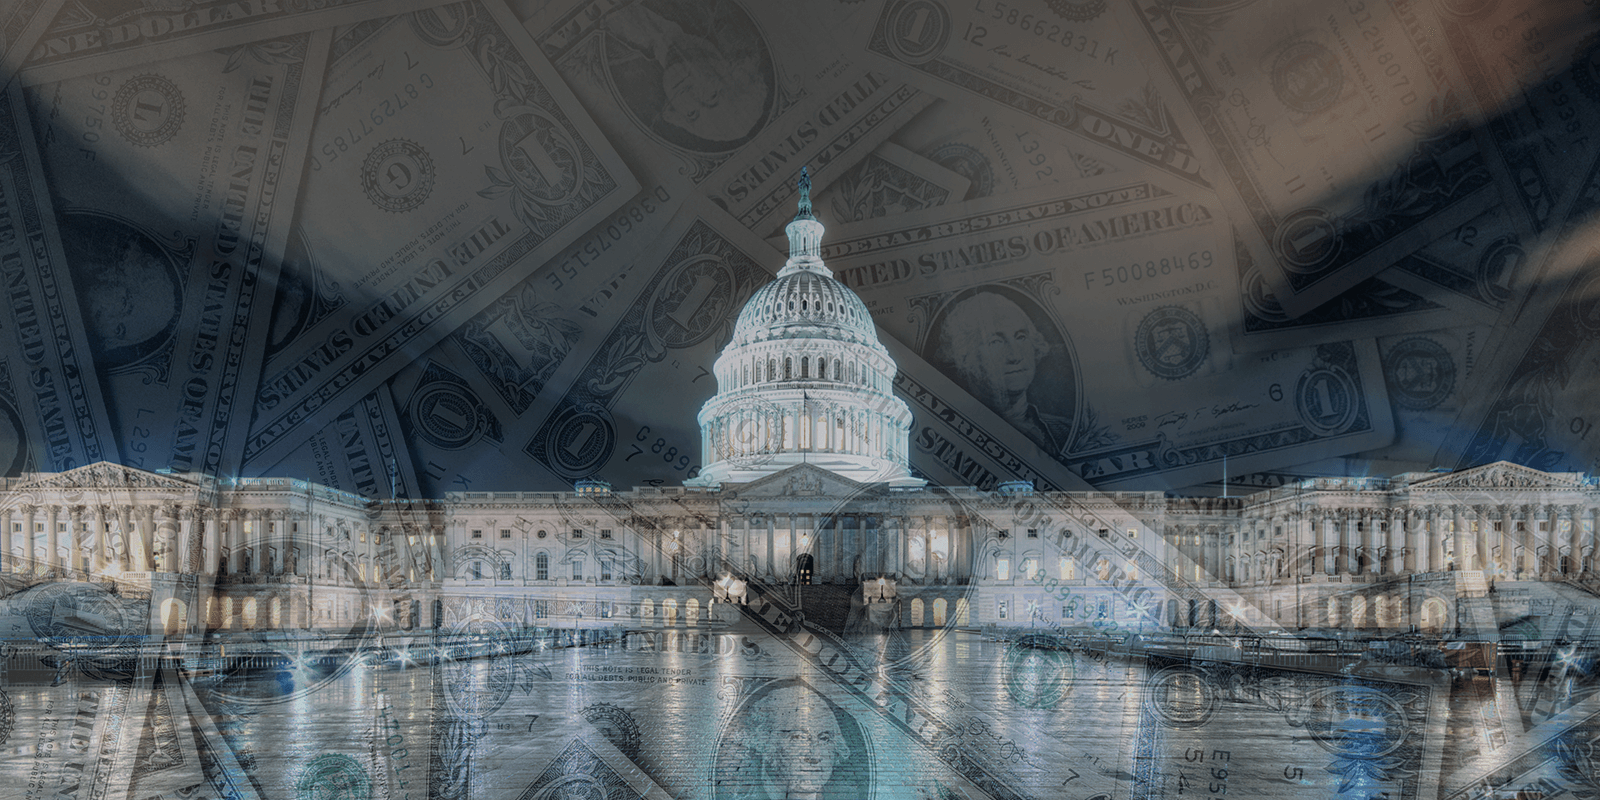 Photograph of the U.S. Capitol building at night overlaid with transparent images of the U.S. $1 bill. 